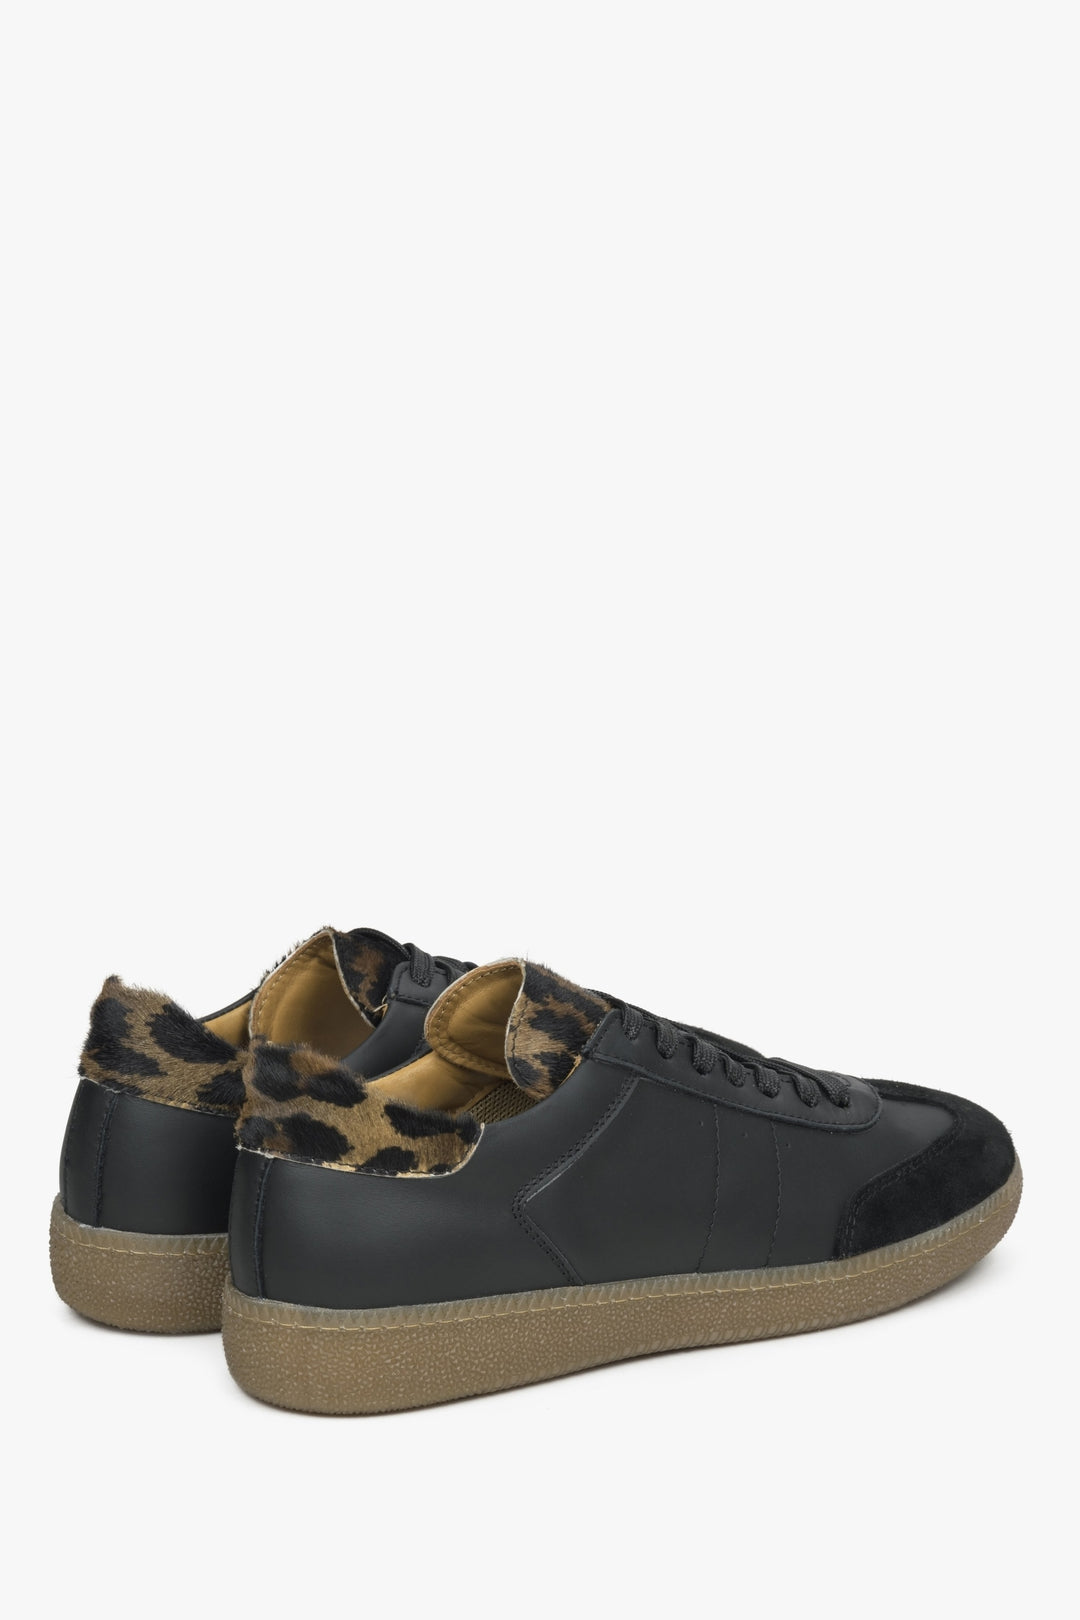 Women's black sneakers made of genuine leather with an Estro animal pattern.